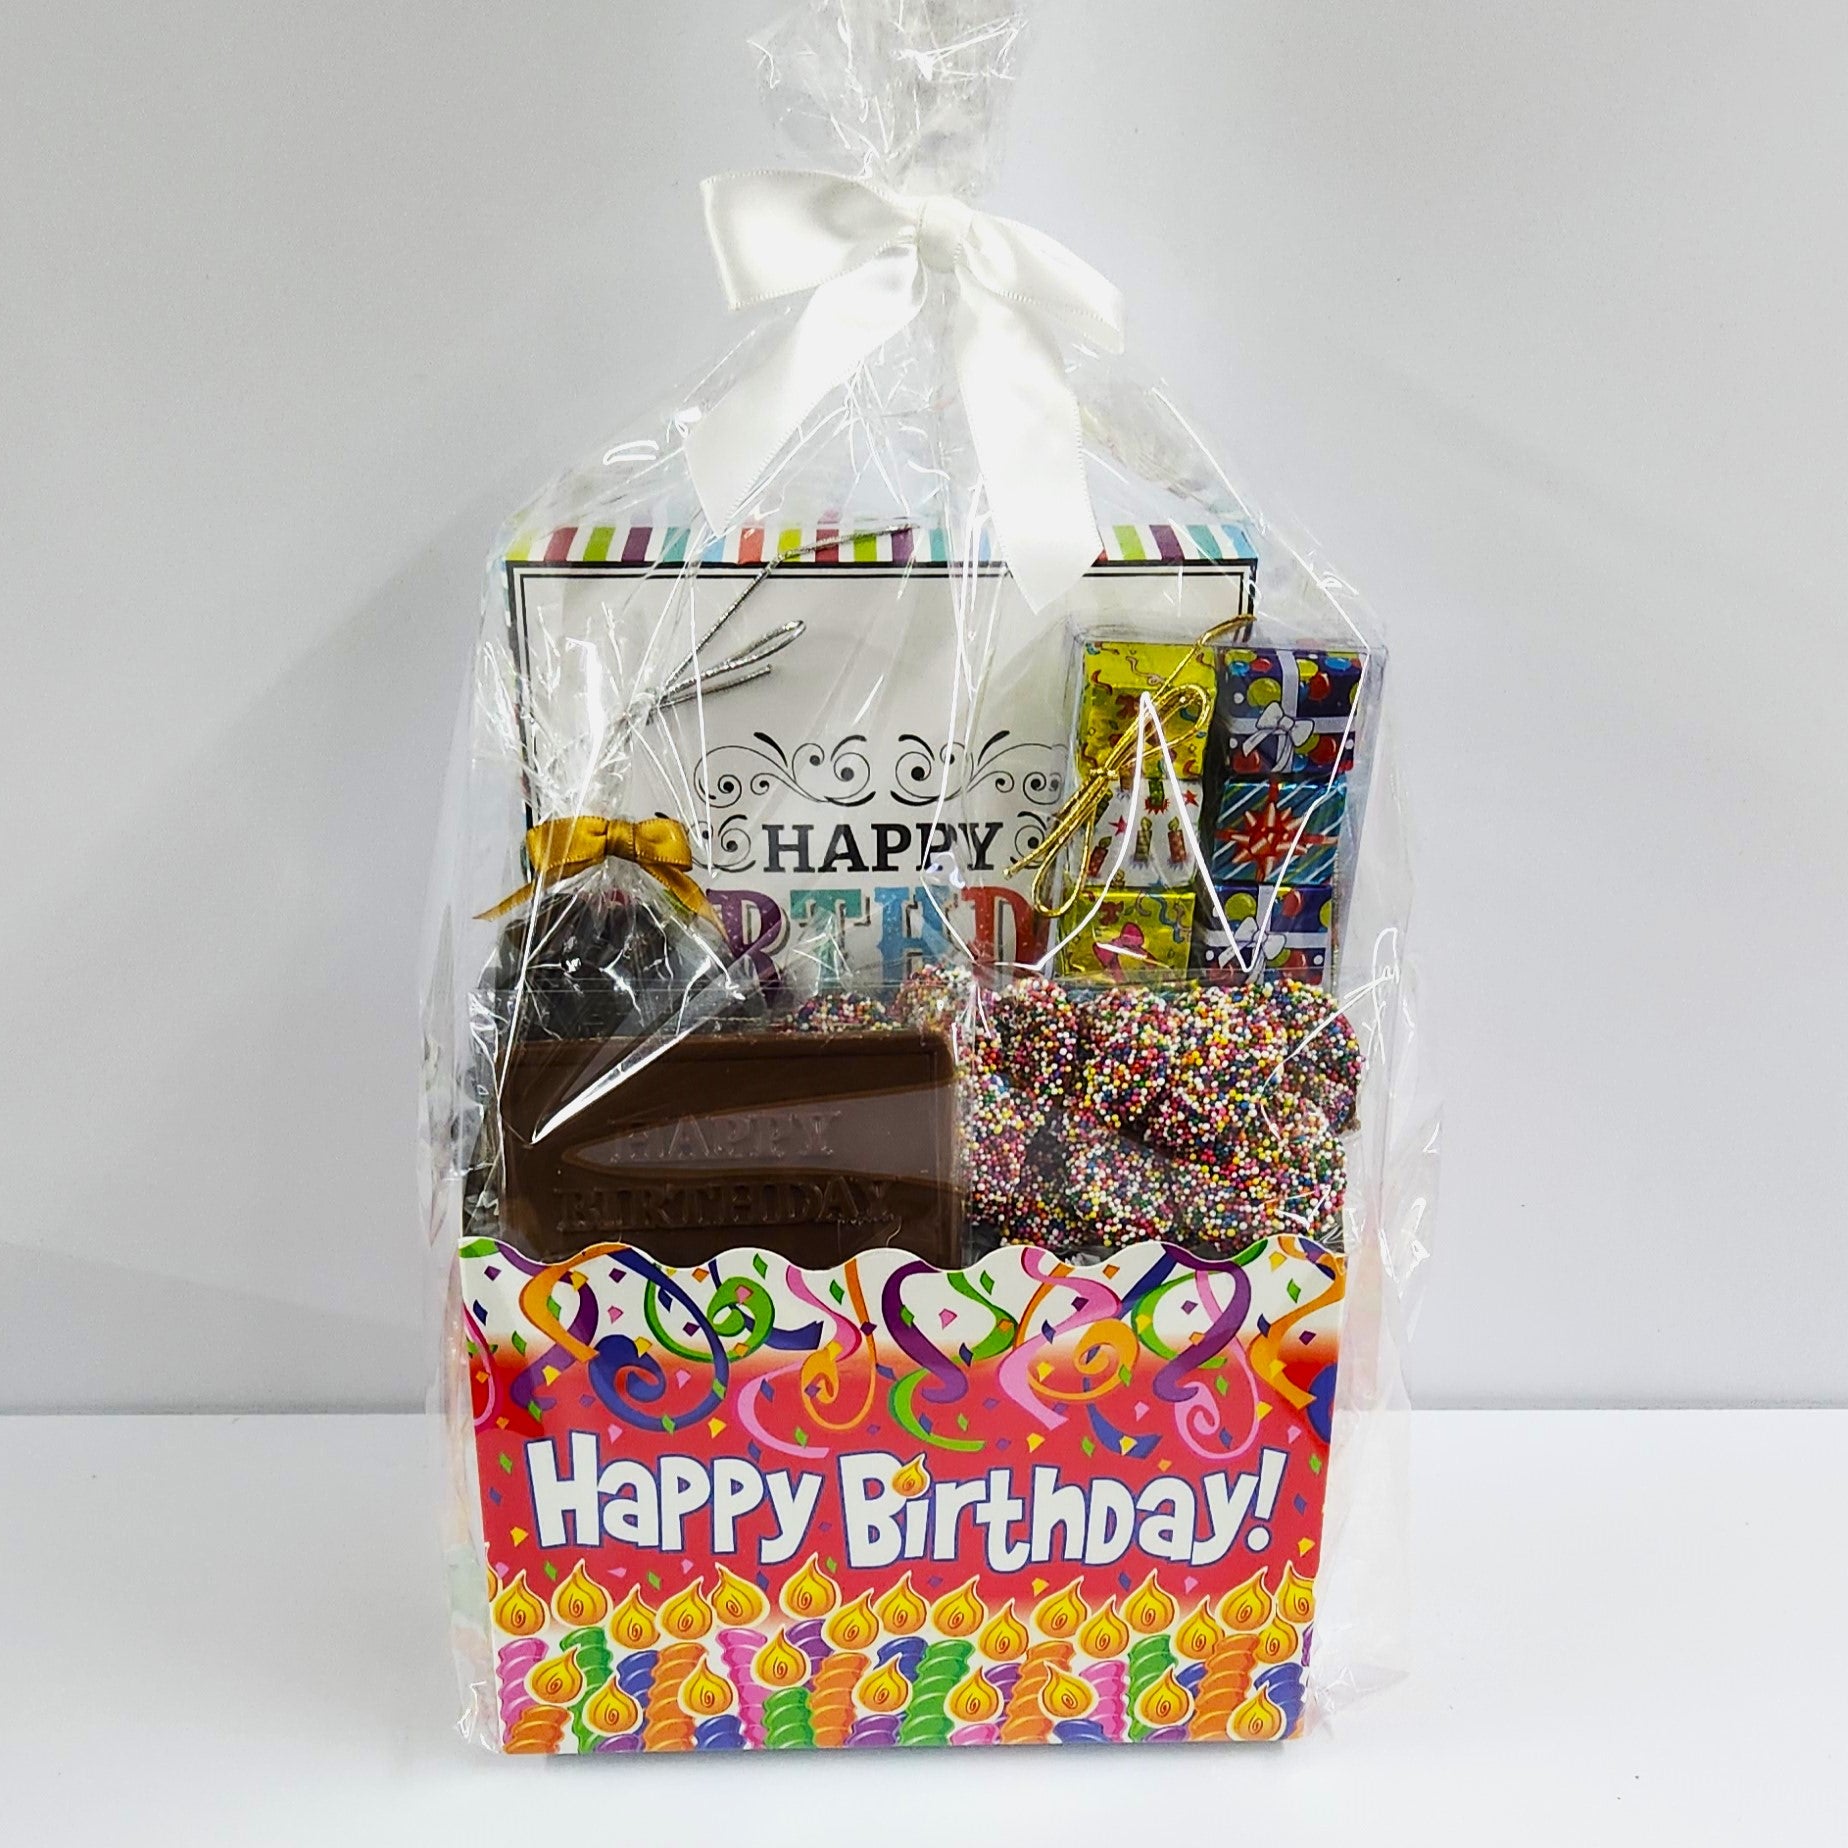 Personalized Birthday Celebration Gift Box: Gift/Send Personalized Gifts  Gifts Online J11146036 |IGP.com